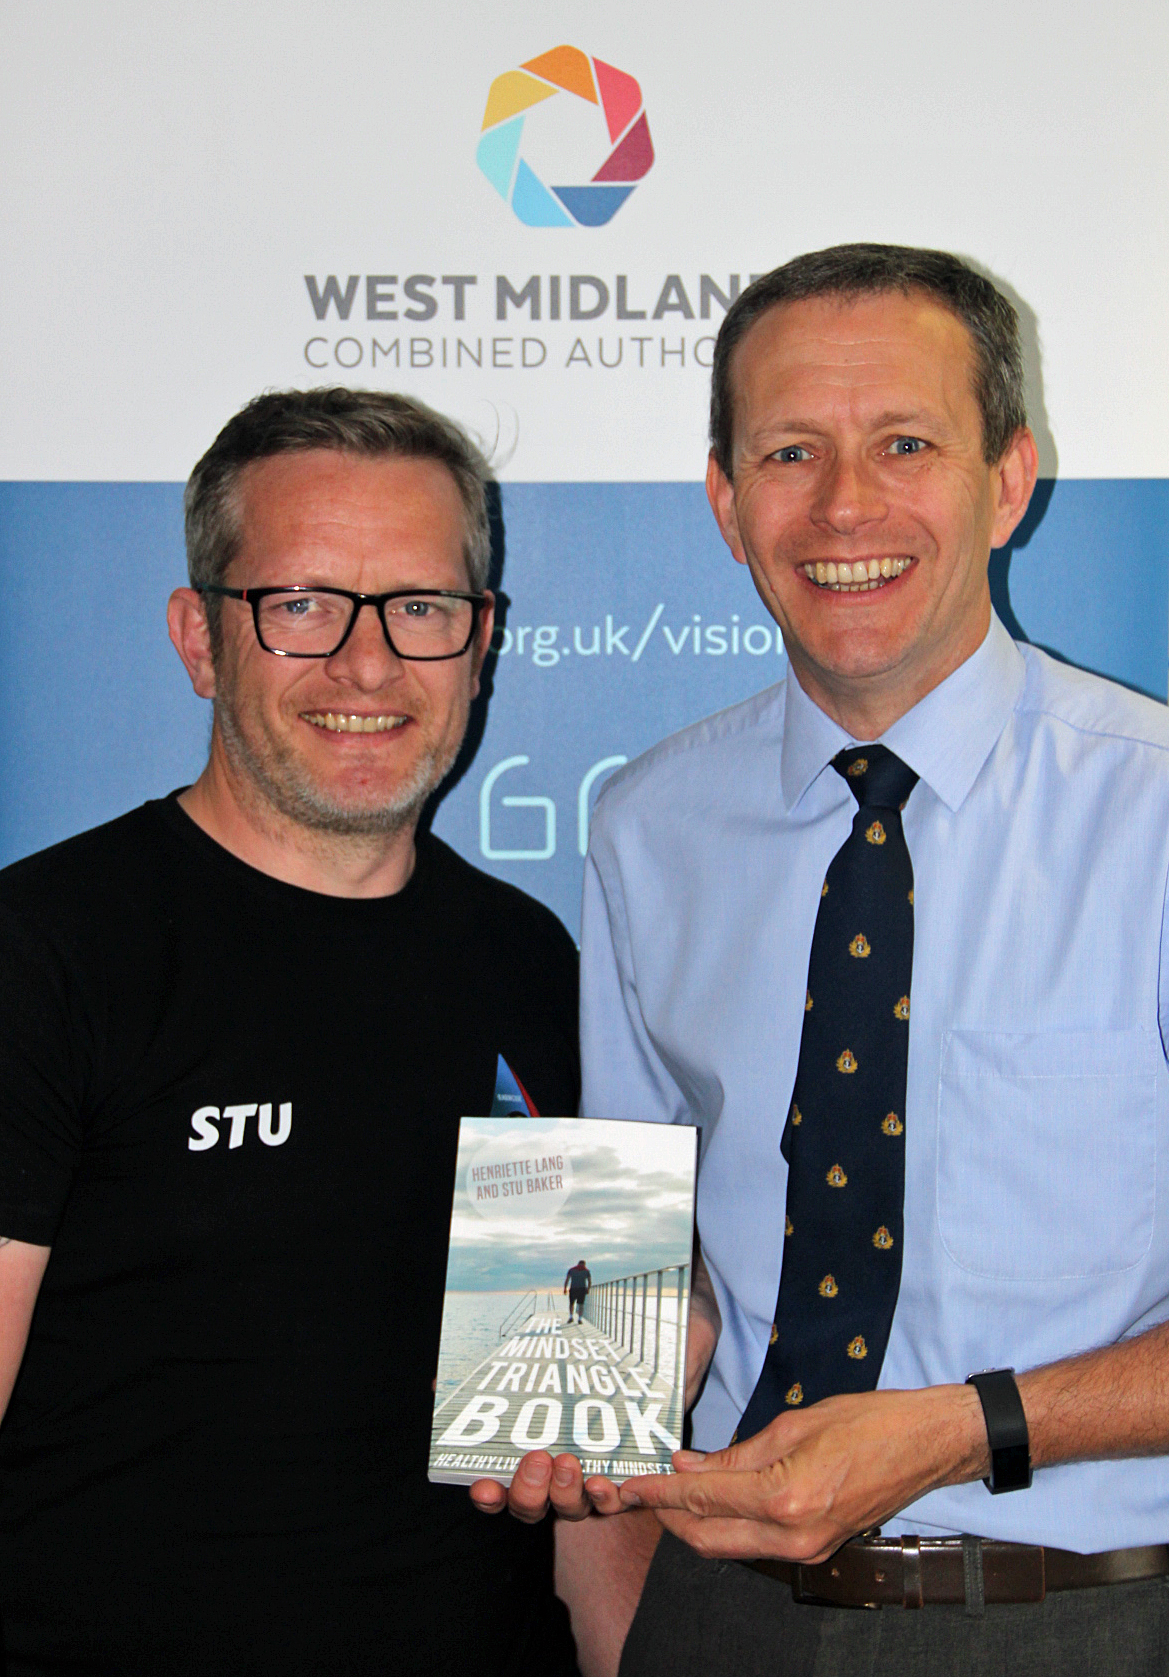 Stu Bagsy signed a copy of his newly published book for Thrive West Midlands implementation director Sean Russell.